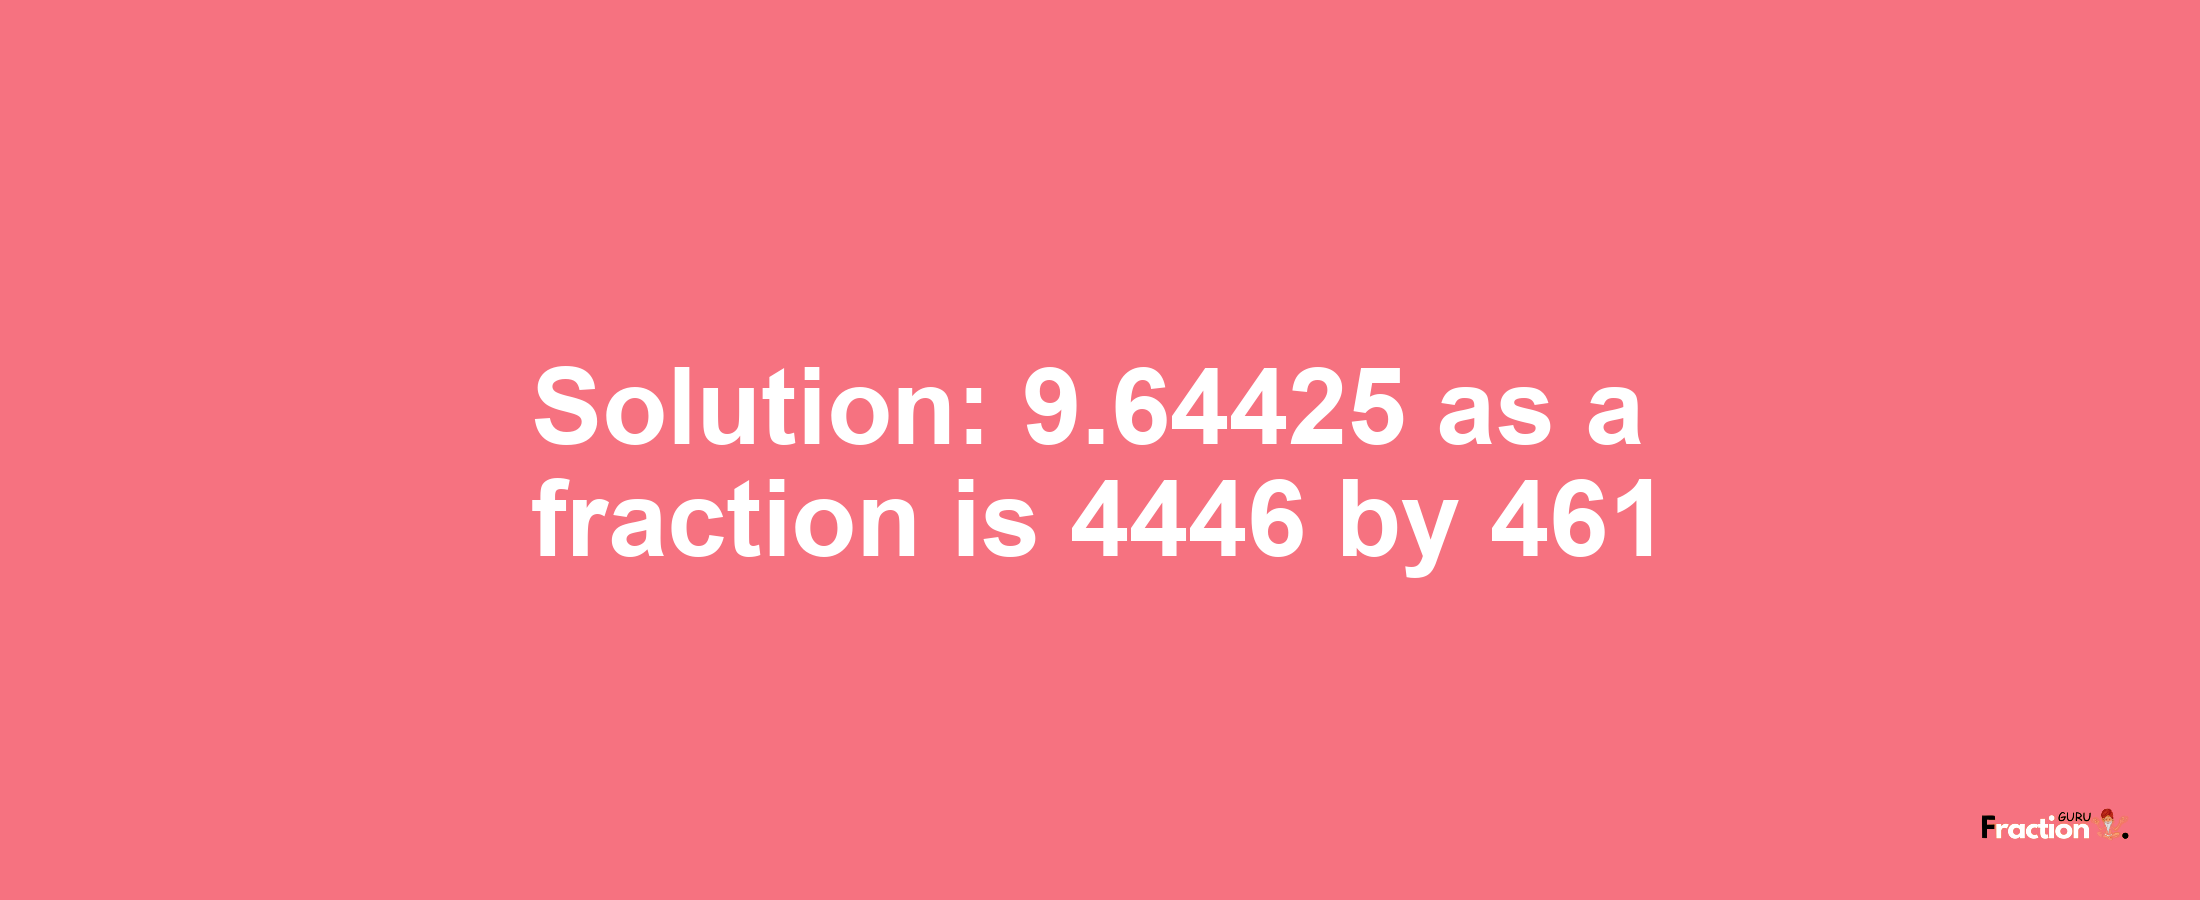 Solution:9.64425 as a fraction is 4446/461